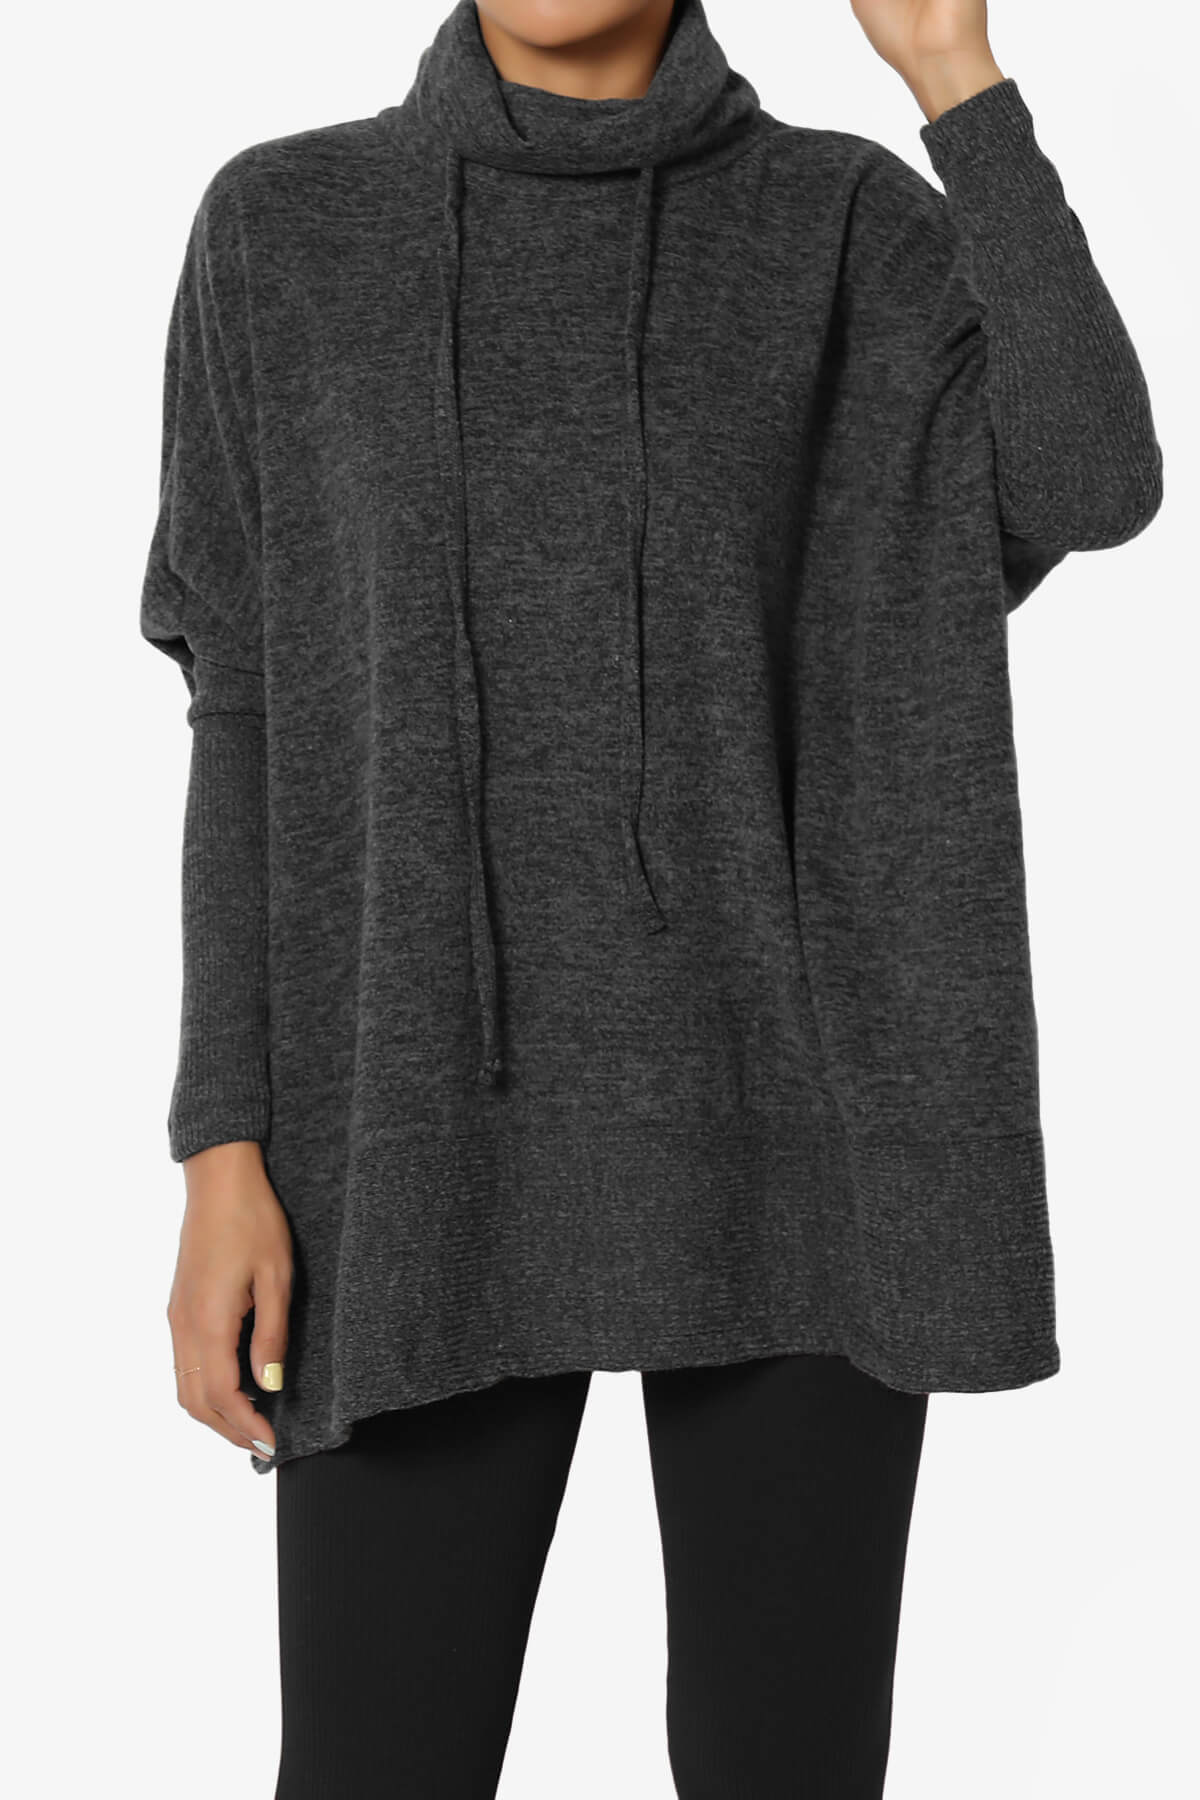 Load image into Gallery viewer, Barclay Cowl Neck Melange Knit Oversized Sweater BLACK_1
